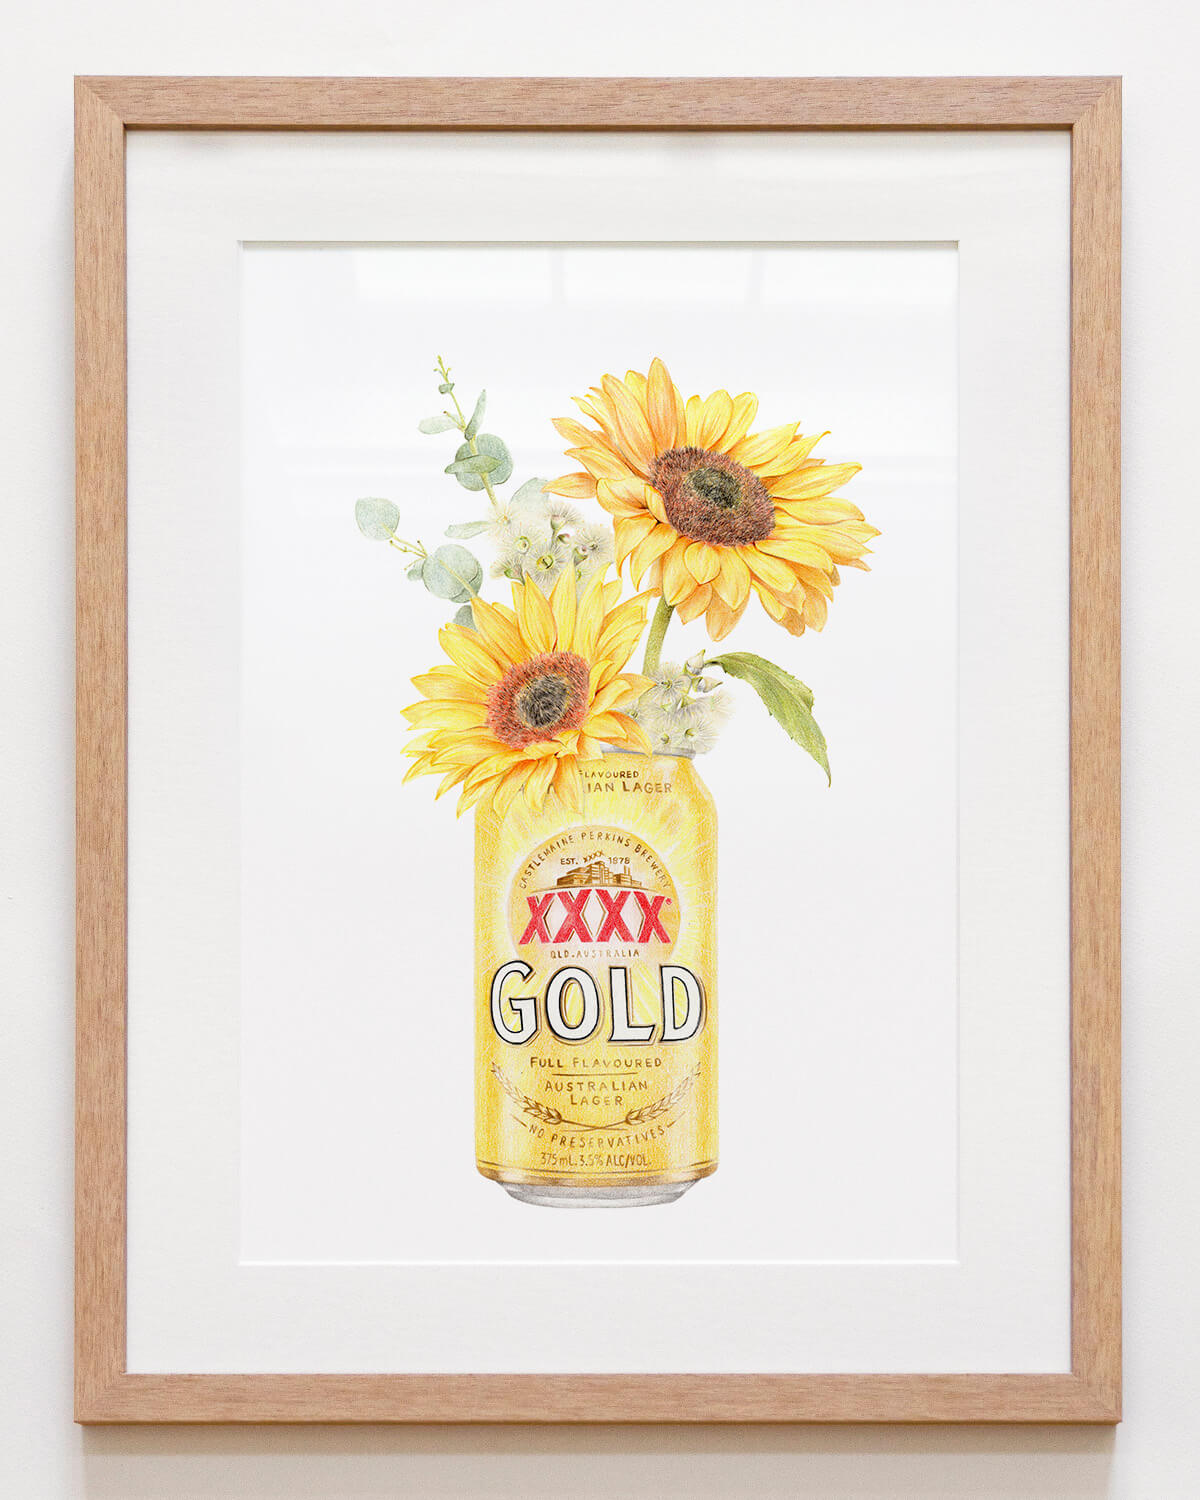 Iconic Australian beer art featuring XXXX Gold and sunflowers